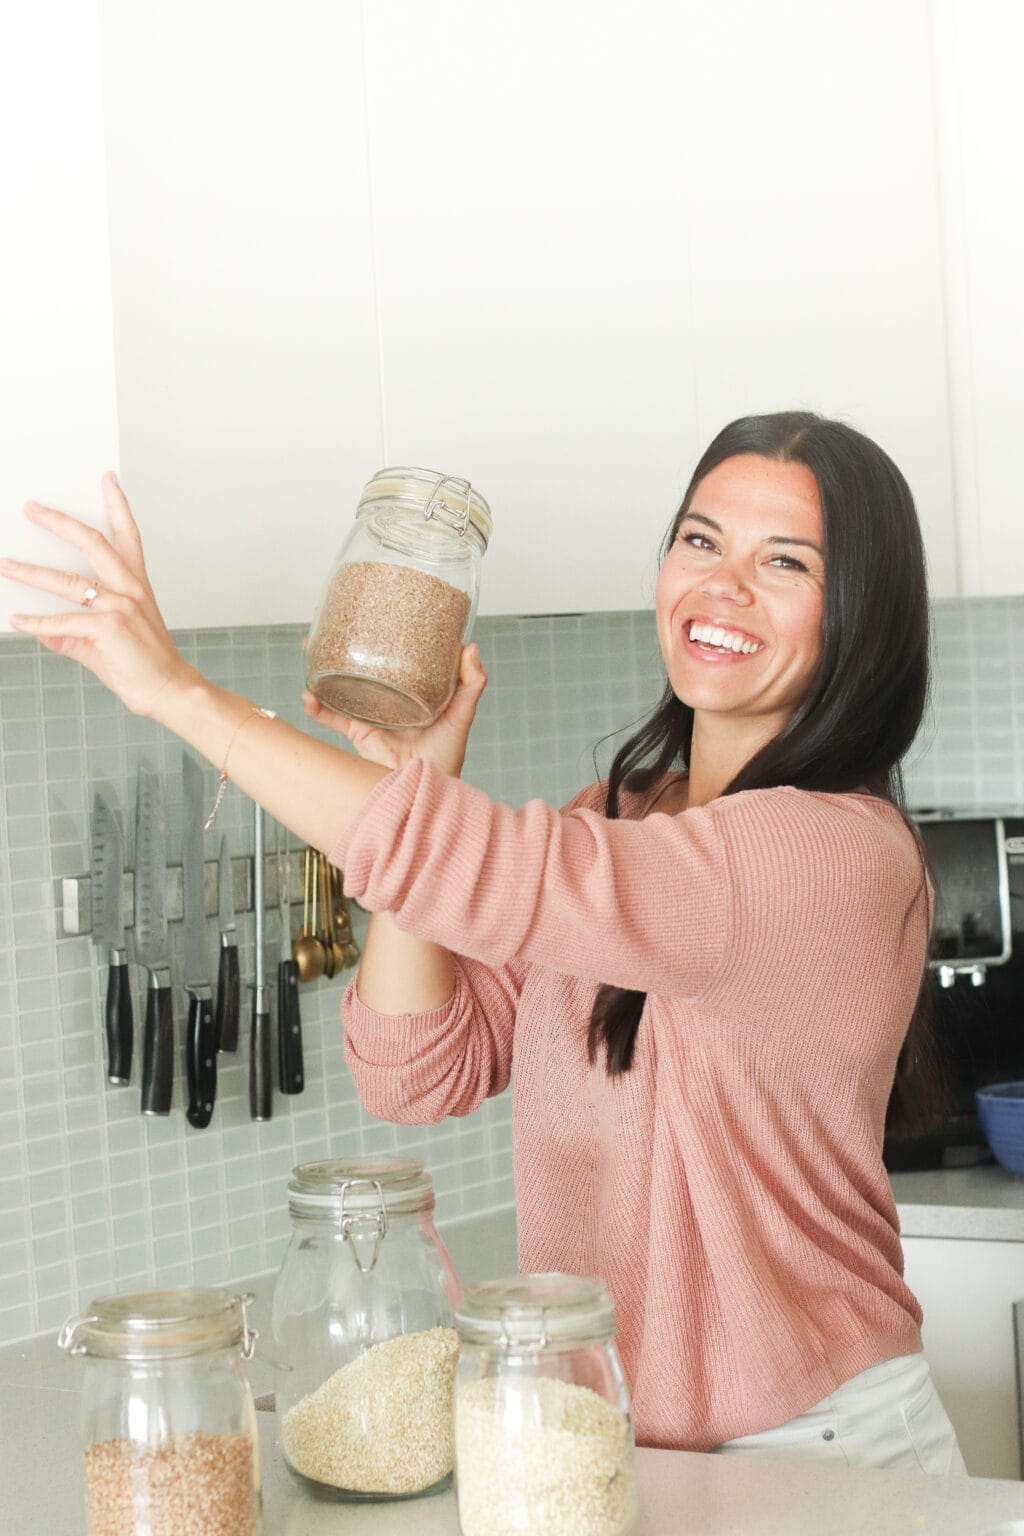 A girl with dark hair and a pink sweater is smiling at the camera. She is holding a jar of grains. In front of her is a jar of oats, rice and quinoa